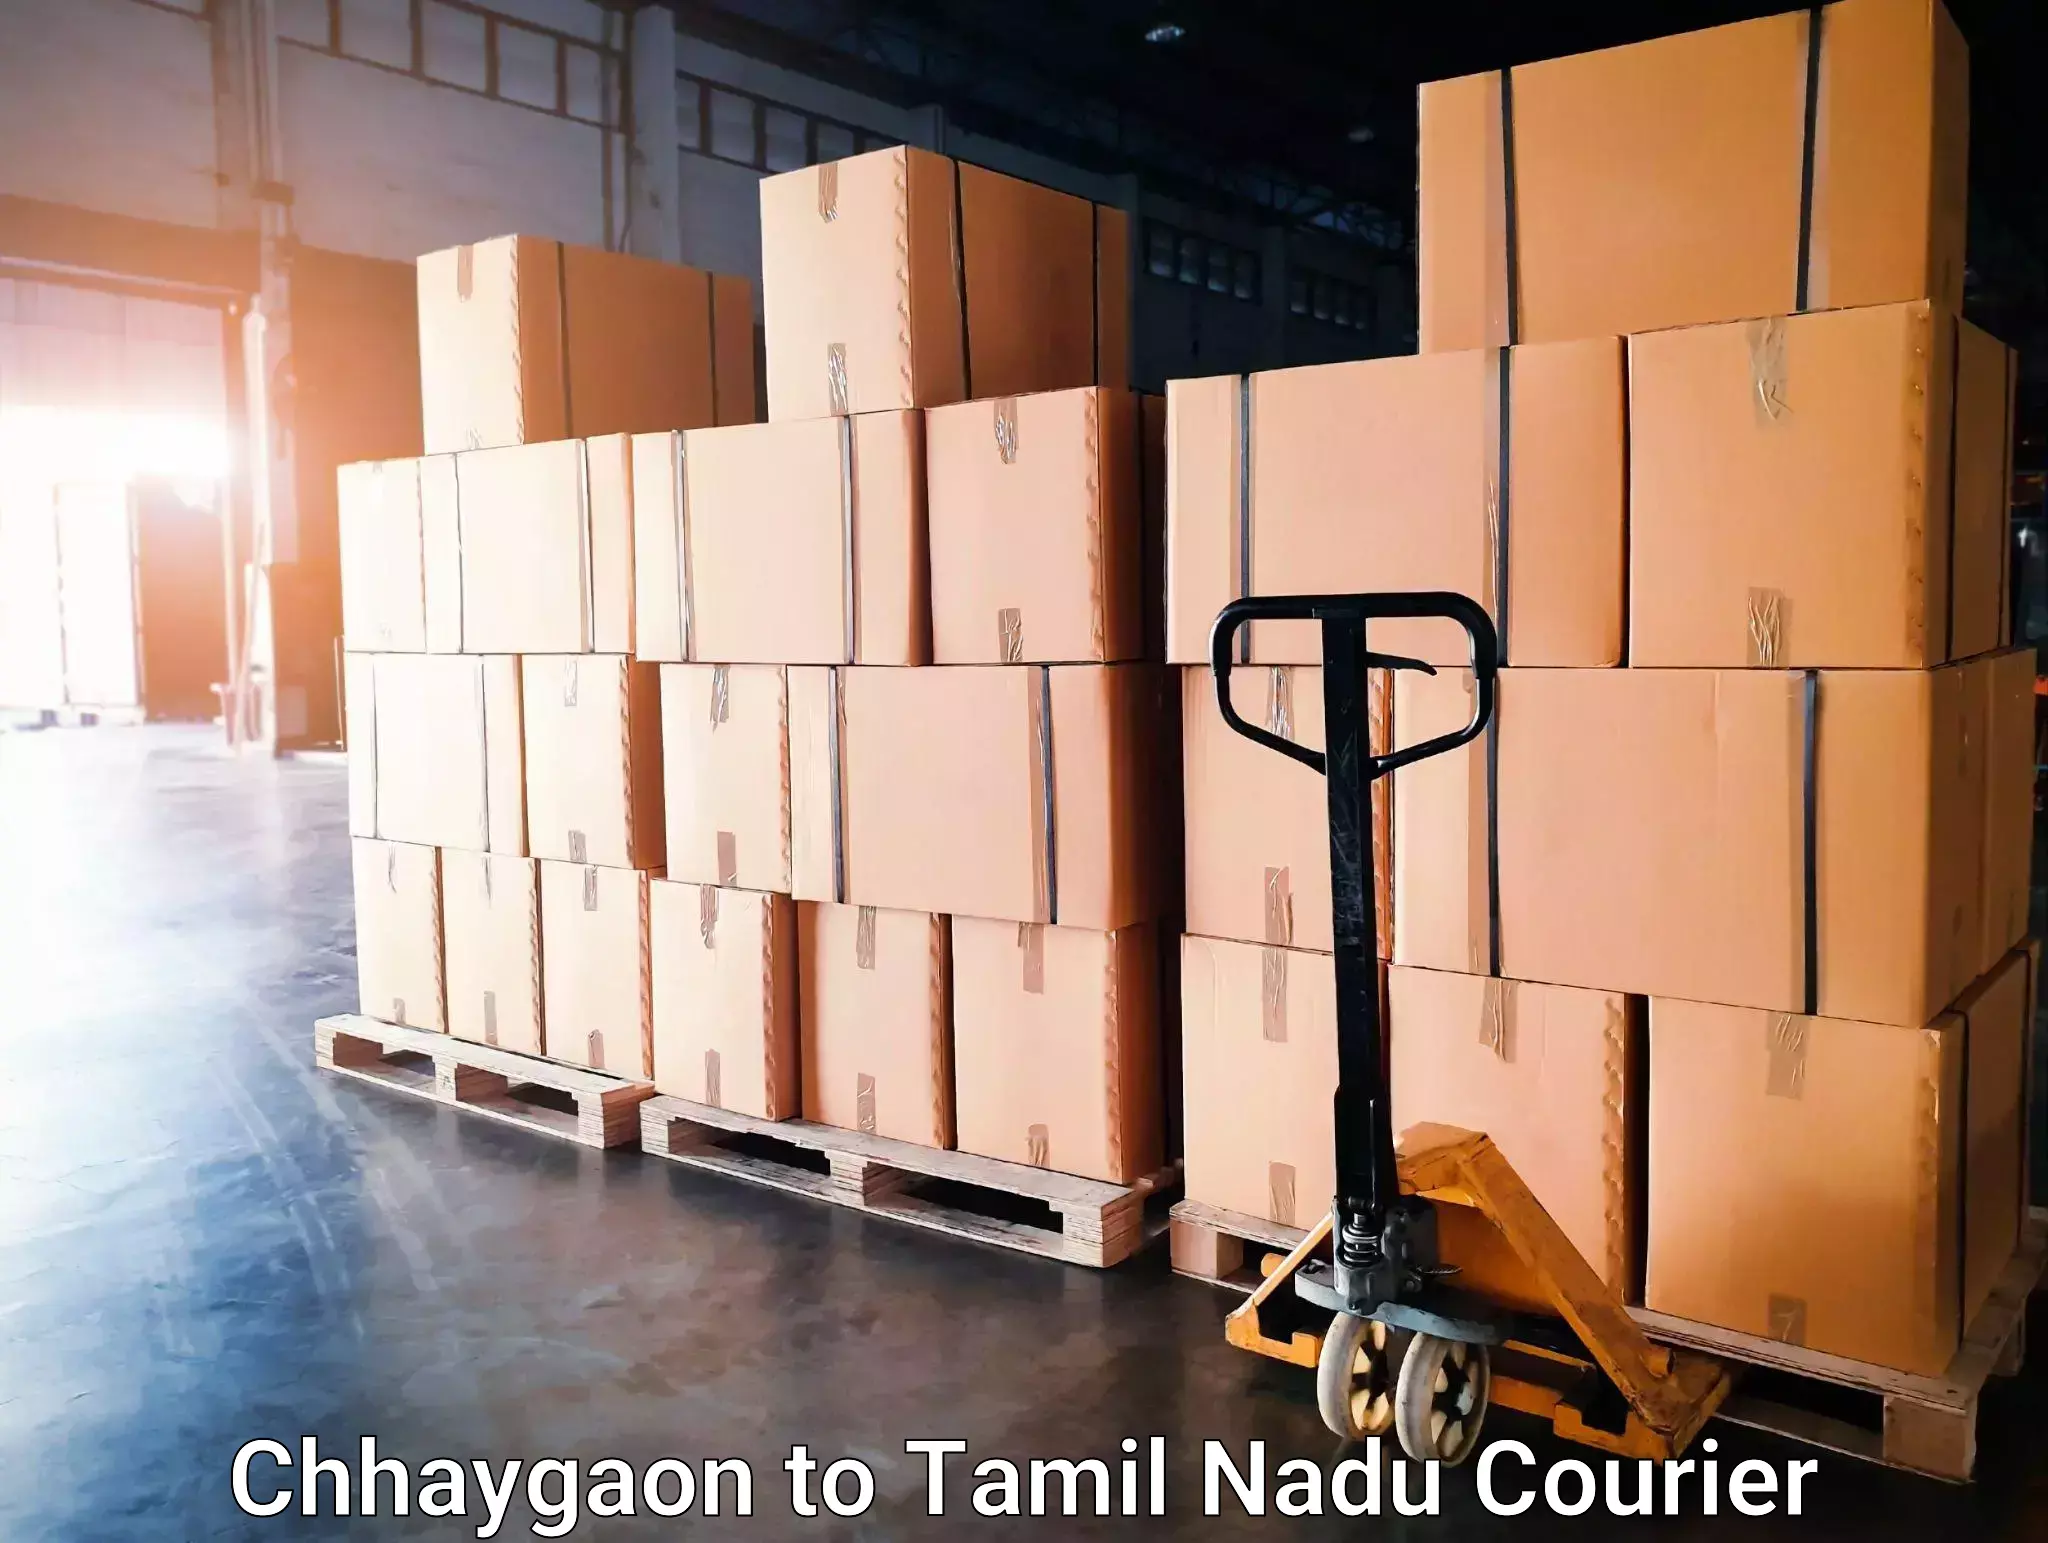 Tech-enabled shipping Chhaygaon to The Gandhigram Rural Institute